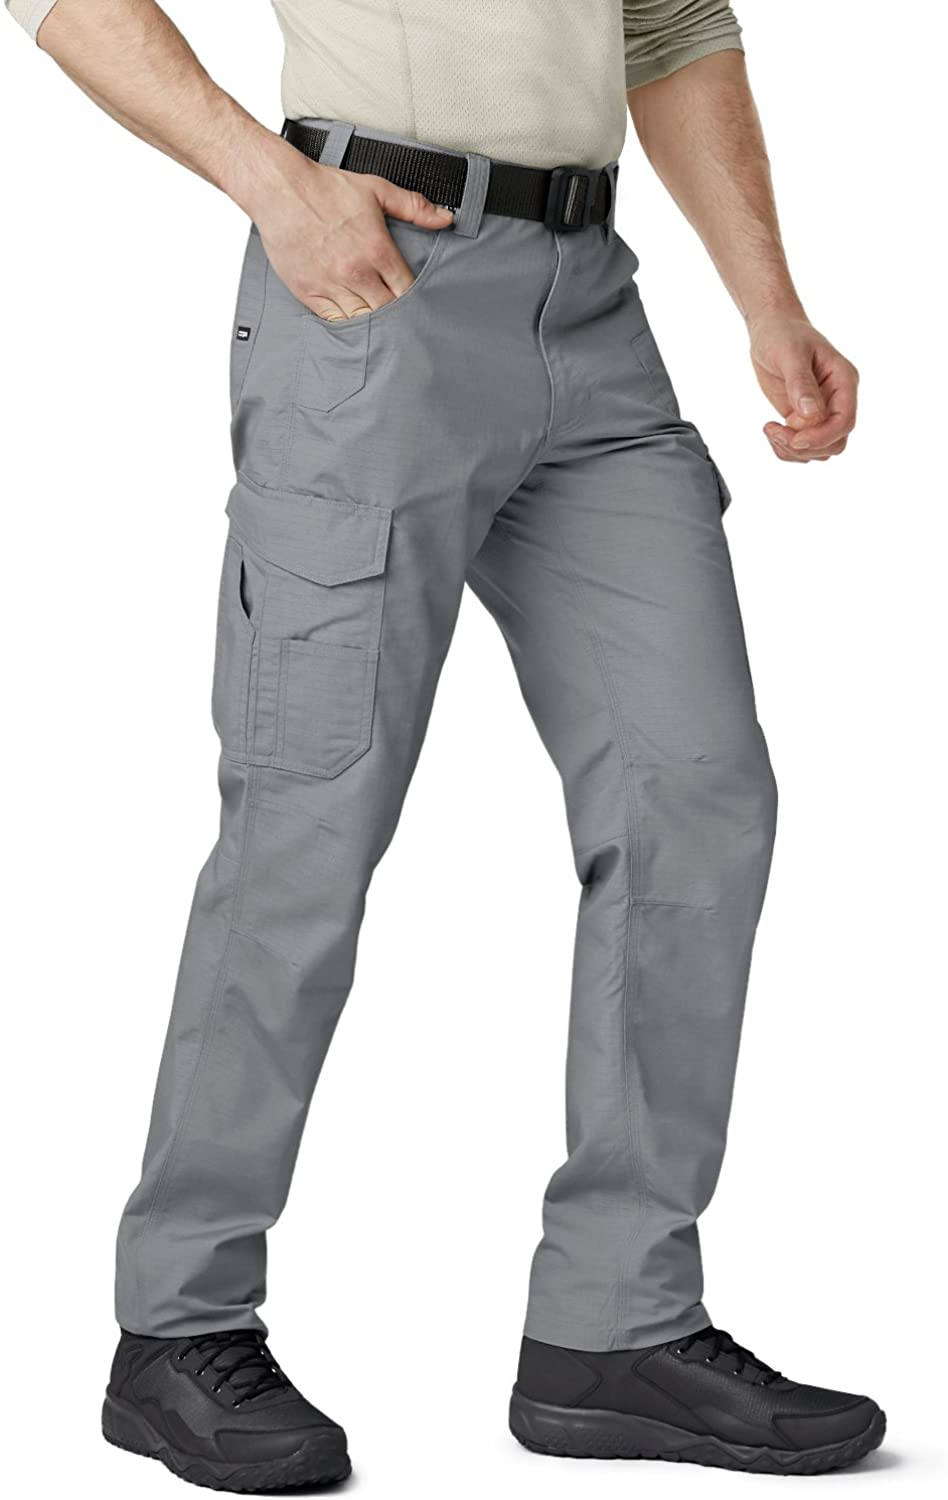 Outdoor Utility Operator EDC Straight/Cargo Pants Water Repellent Tactical Pants CQR Mens Ripstop Work Pants 